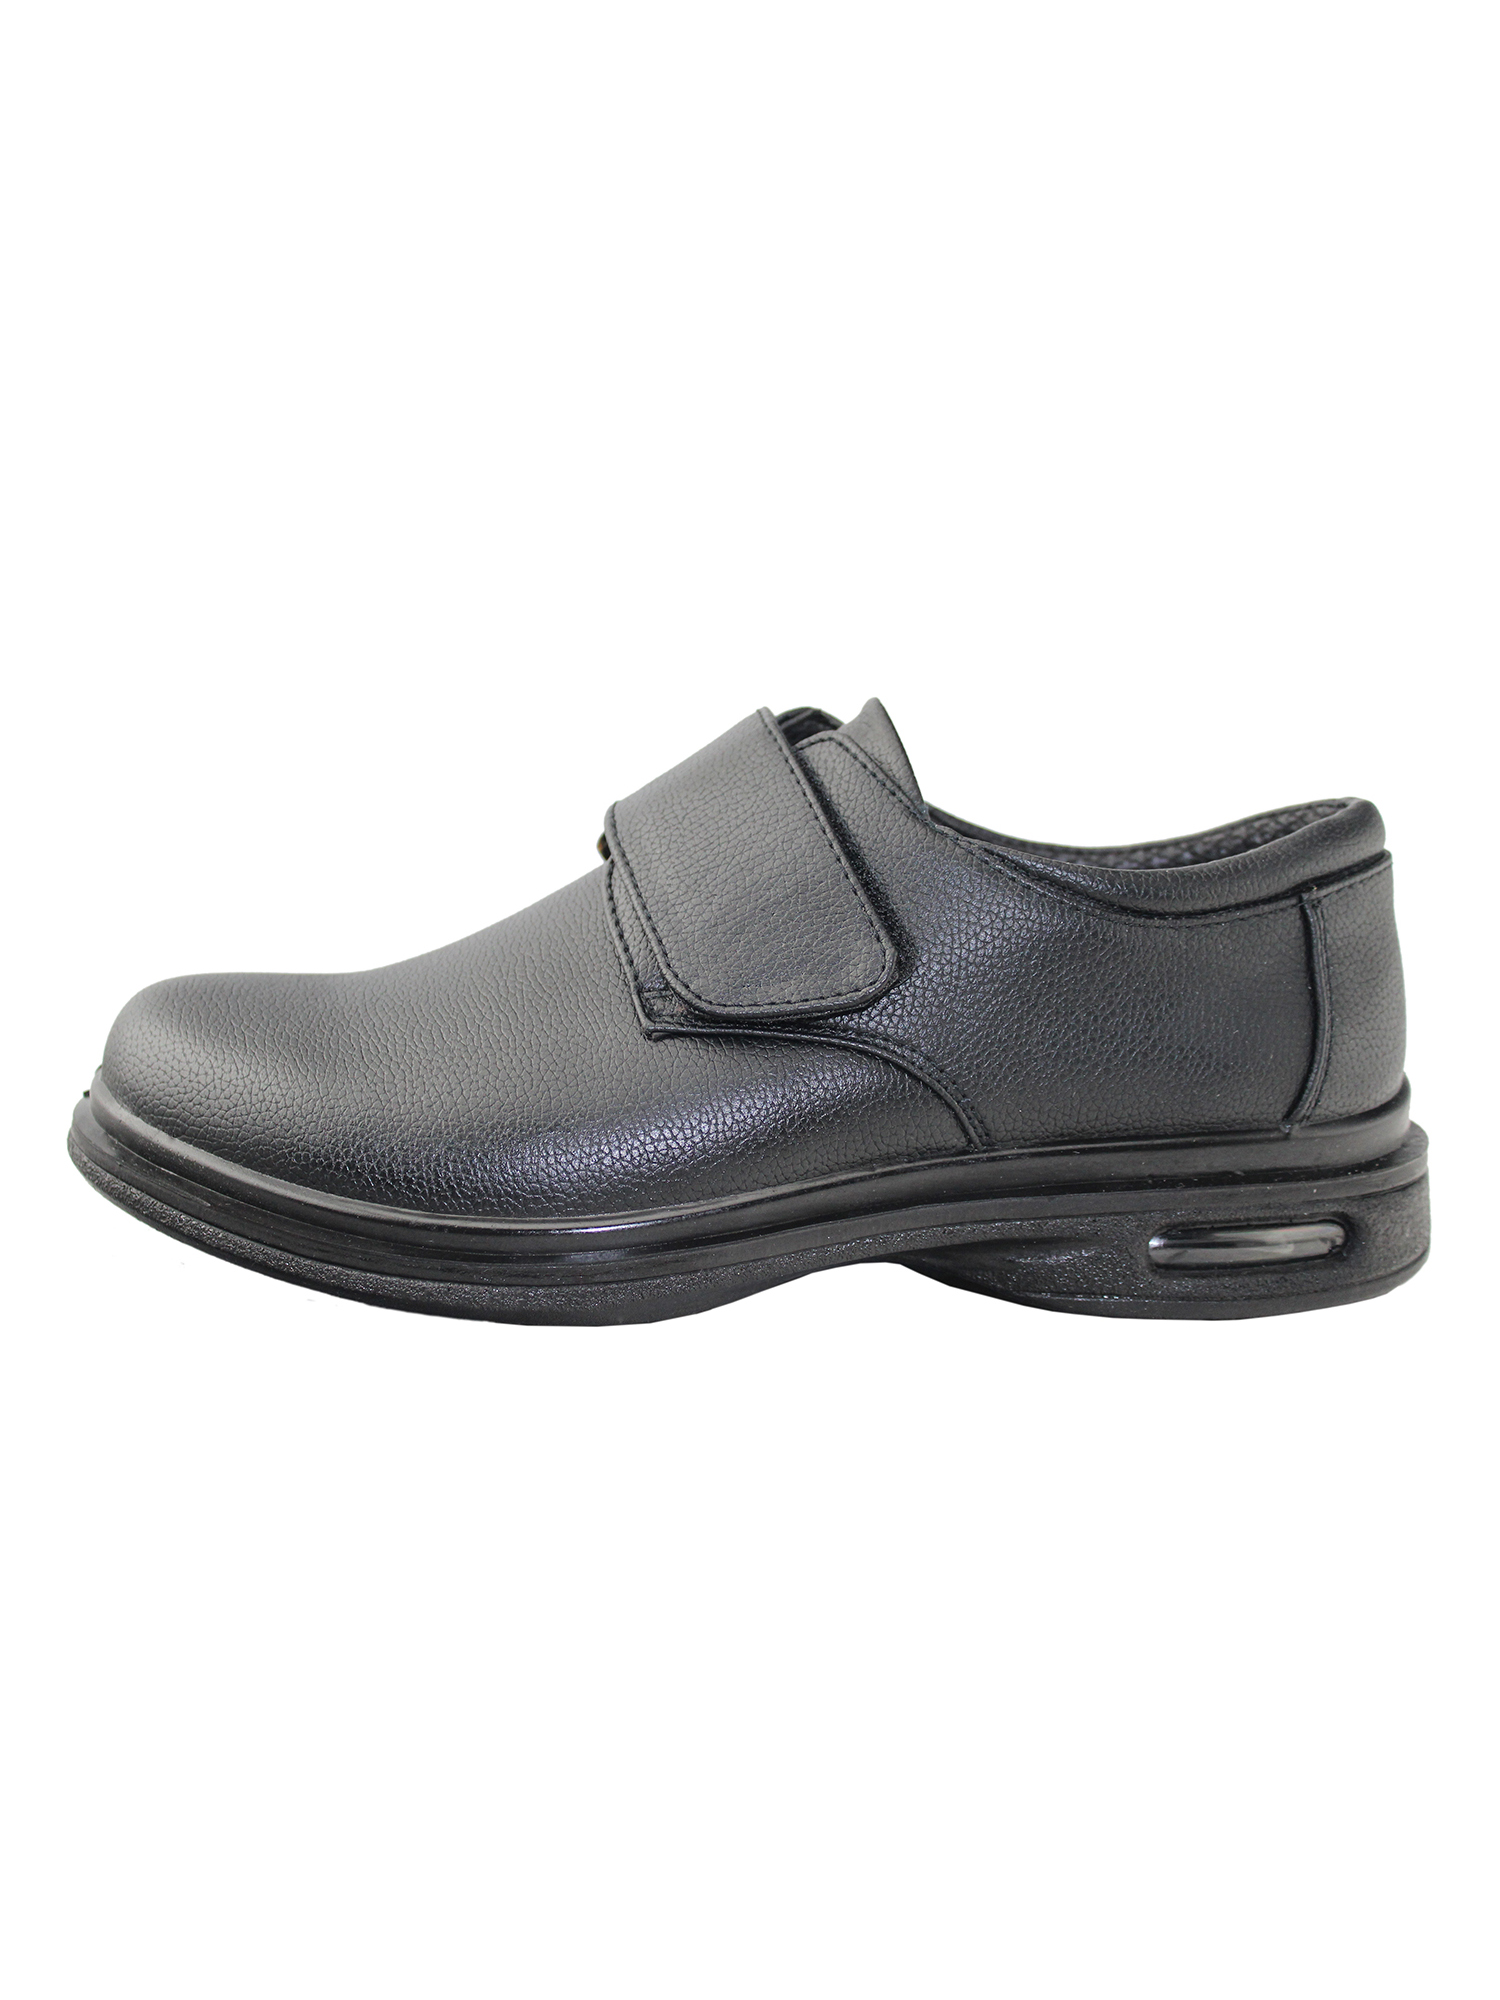 Mens Lightweight Non-Slip And Oil Resistant Shoes Autumn Winter Comfortable Air-Cushioning Casual Shoes - image 2 of 5